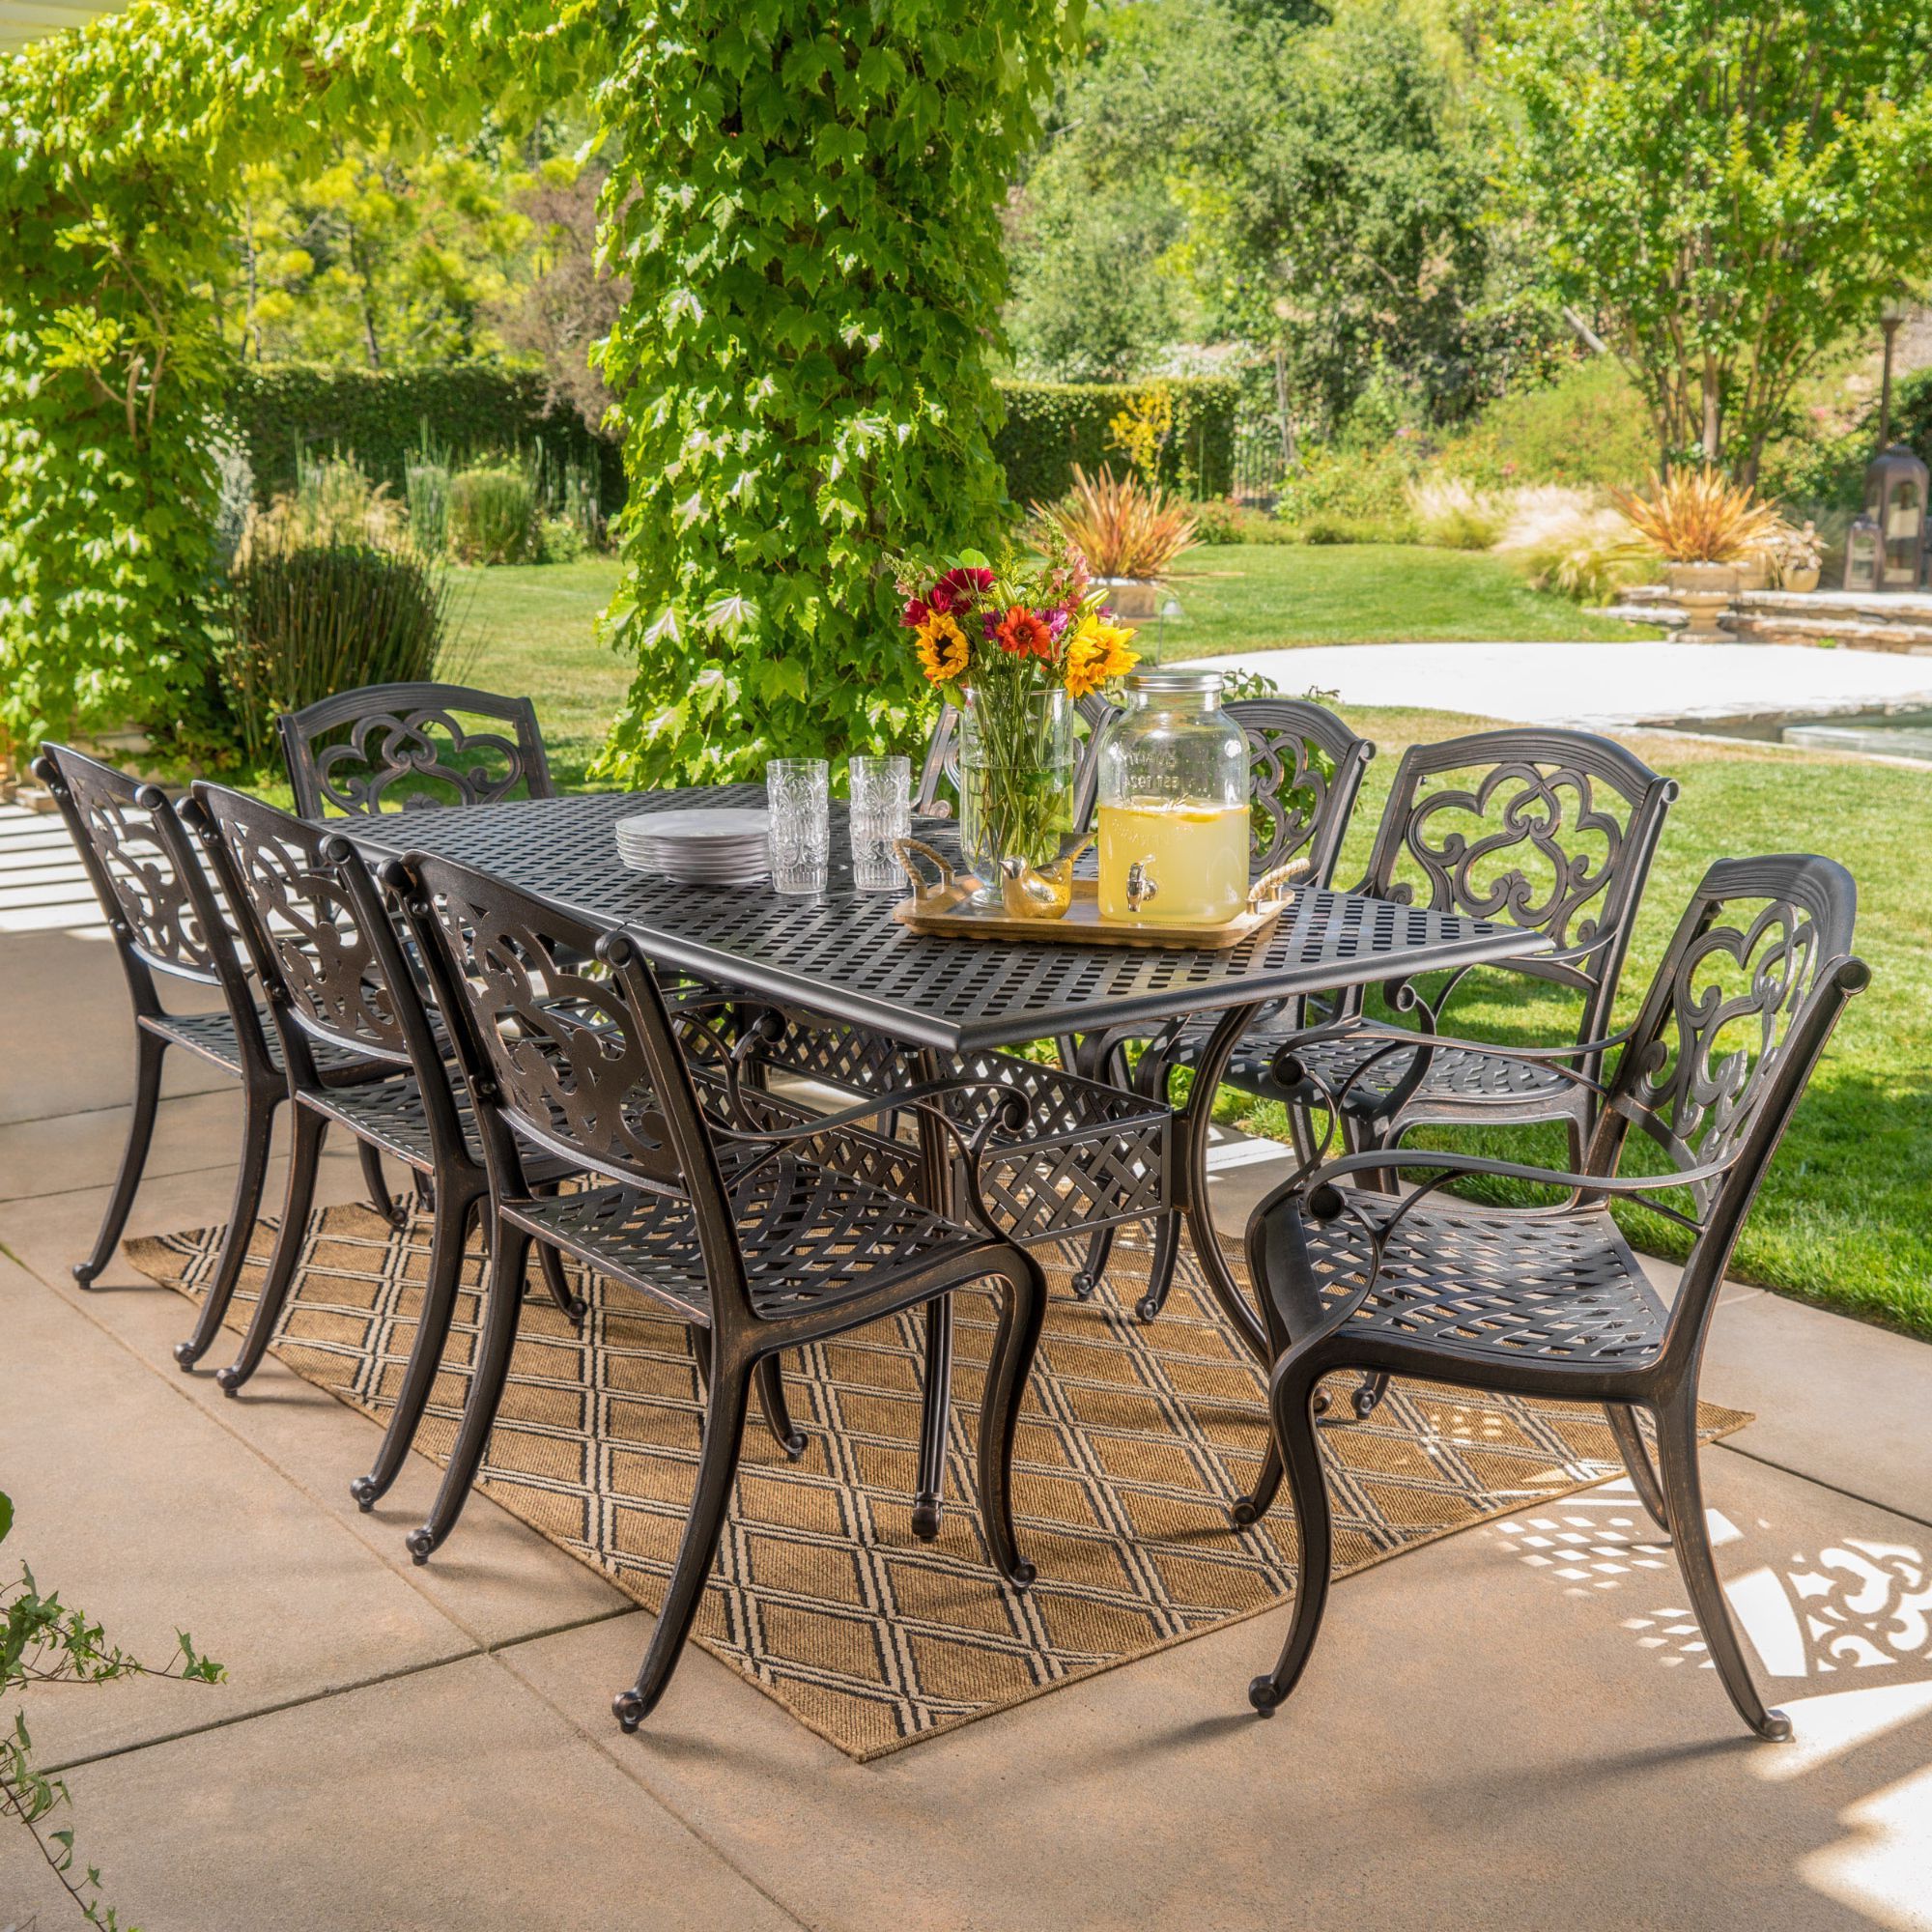 9 Piece Extendable Patio Dining Sets Within Well Known 9 Piece Black Shiny Copper Finish Aluminum Outdoor Furniture Patio (View 6 of 15)